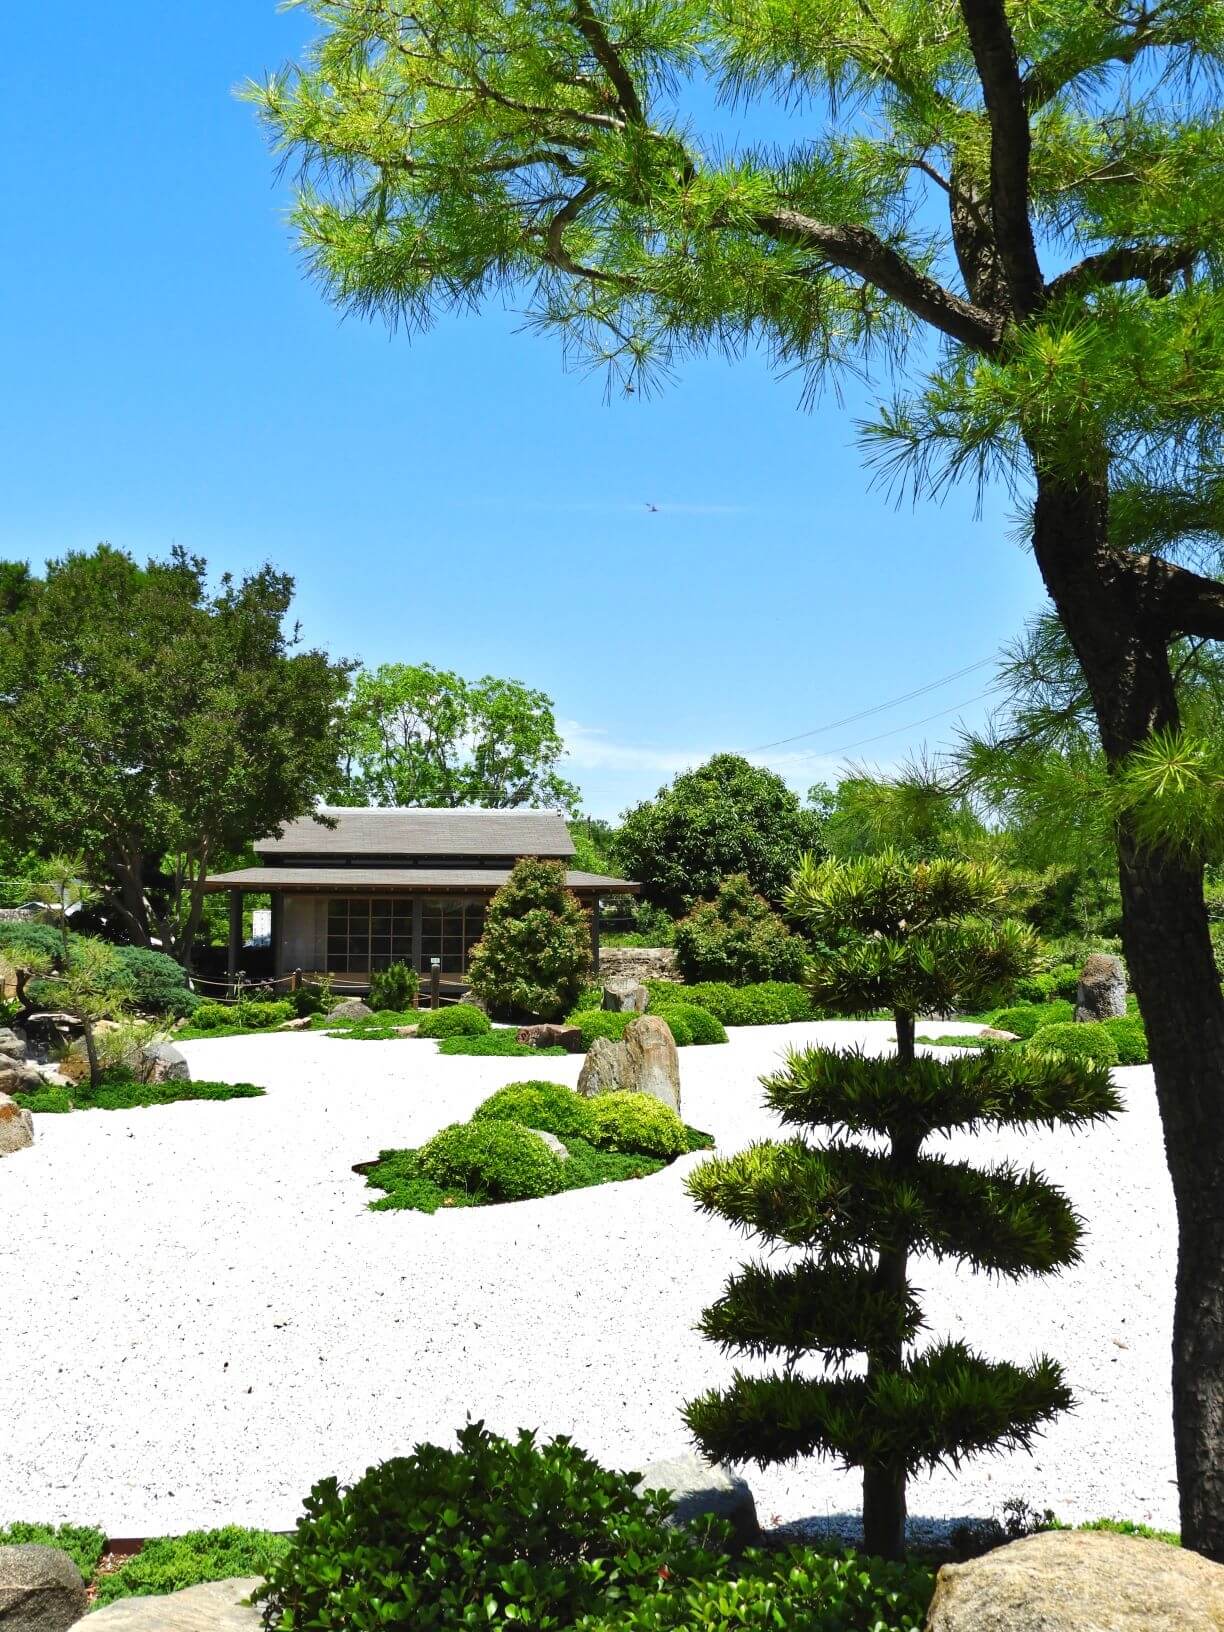 Japanese garden with a pergola, sand, and greenery.